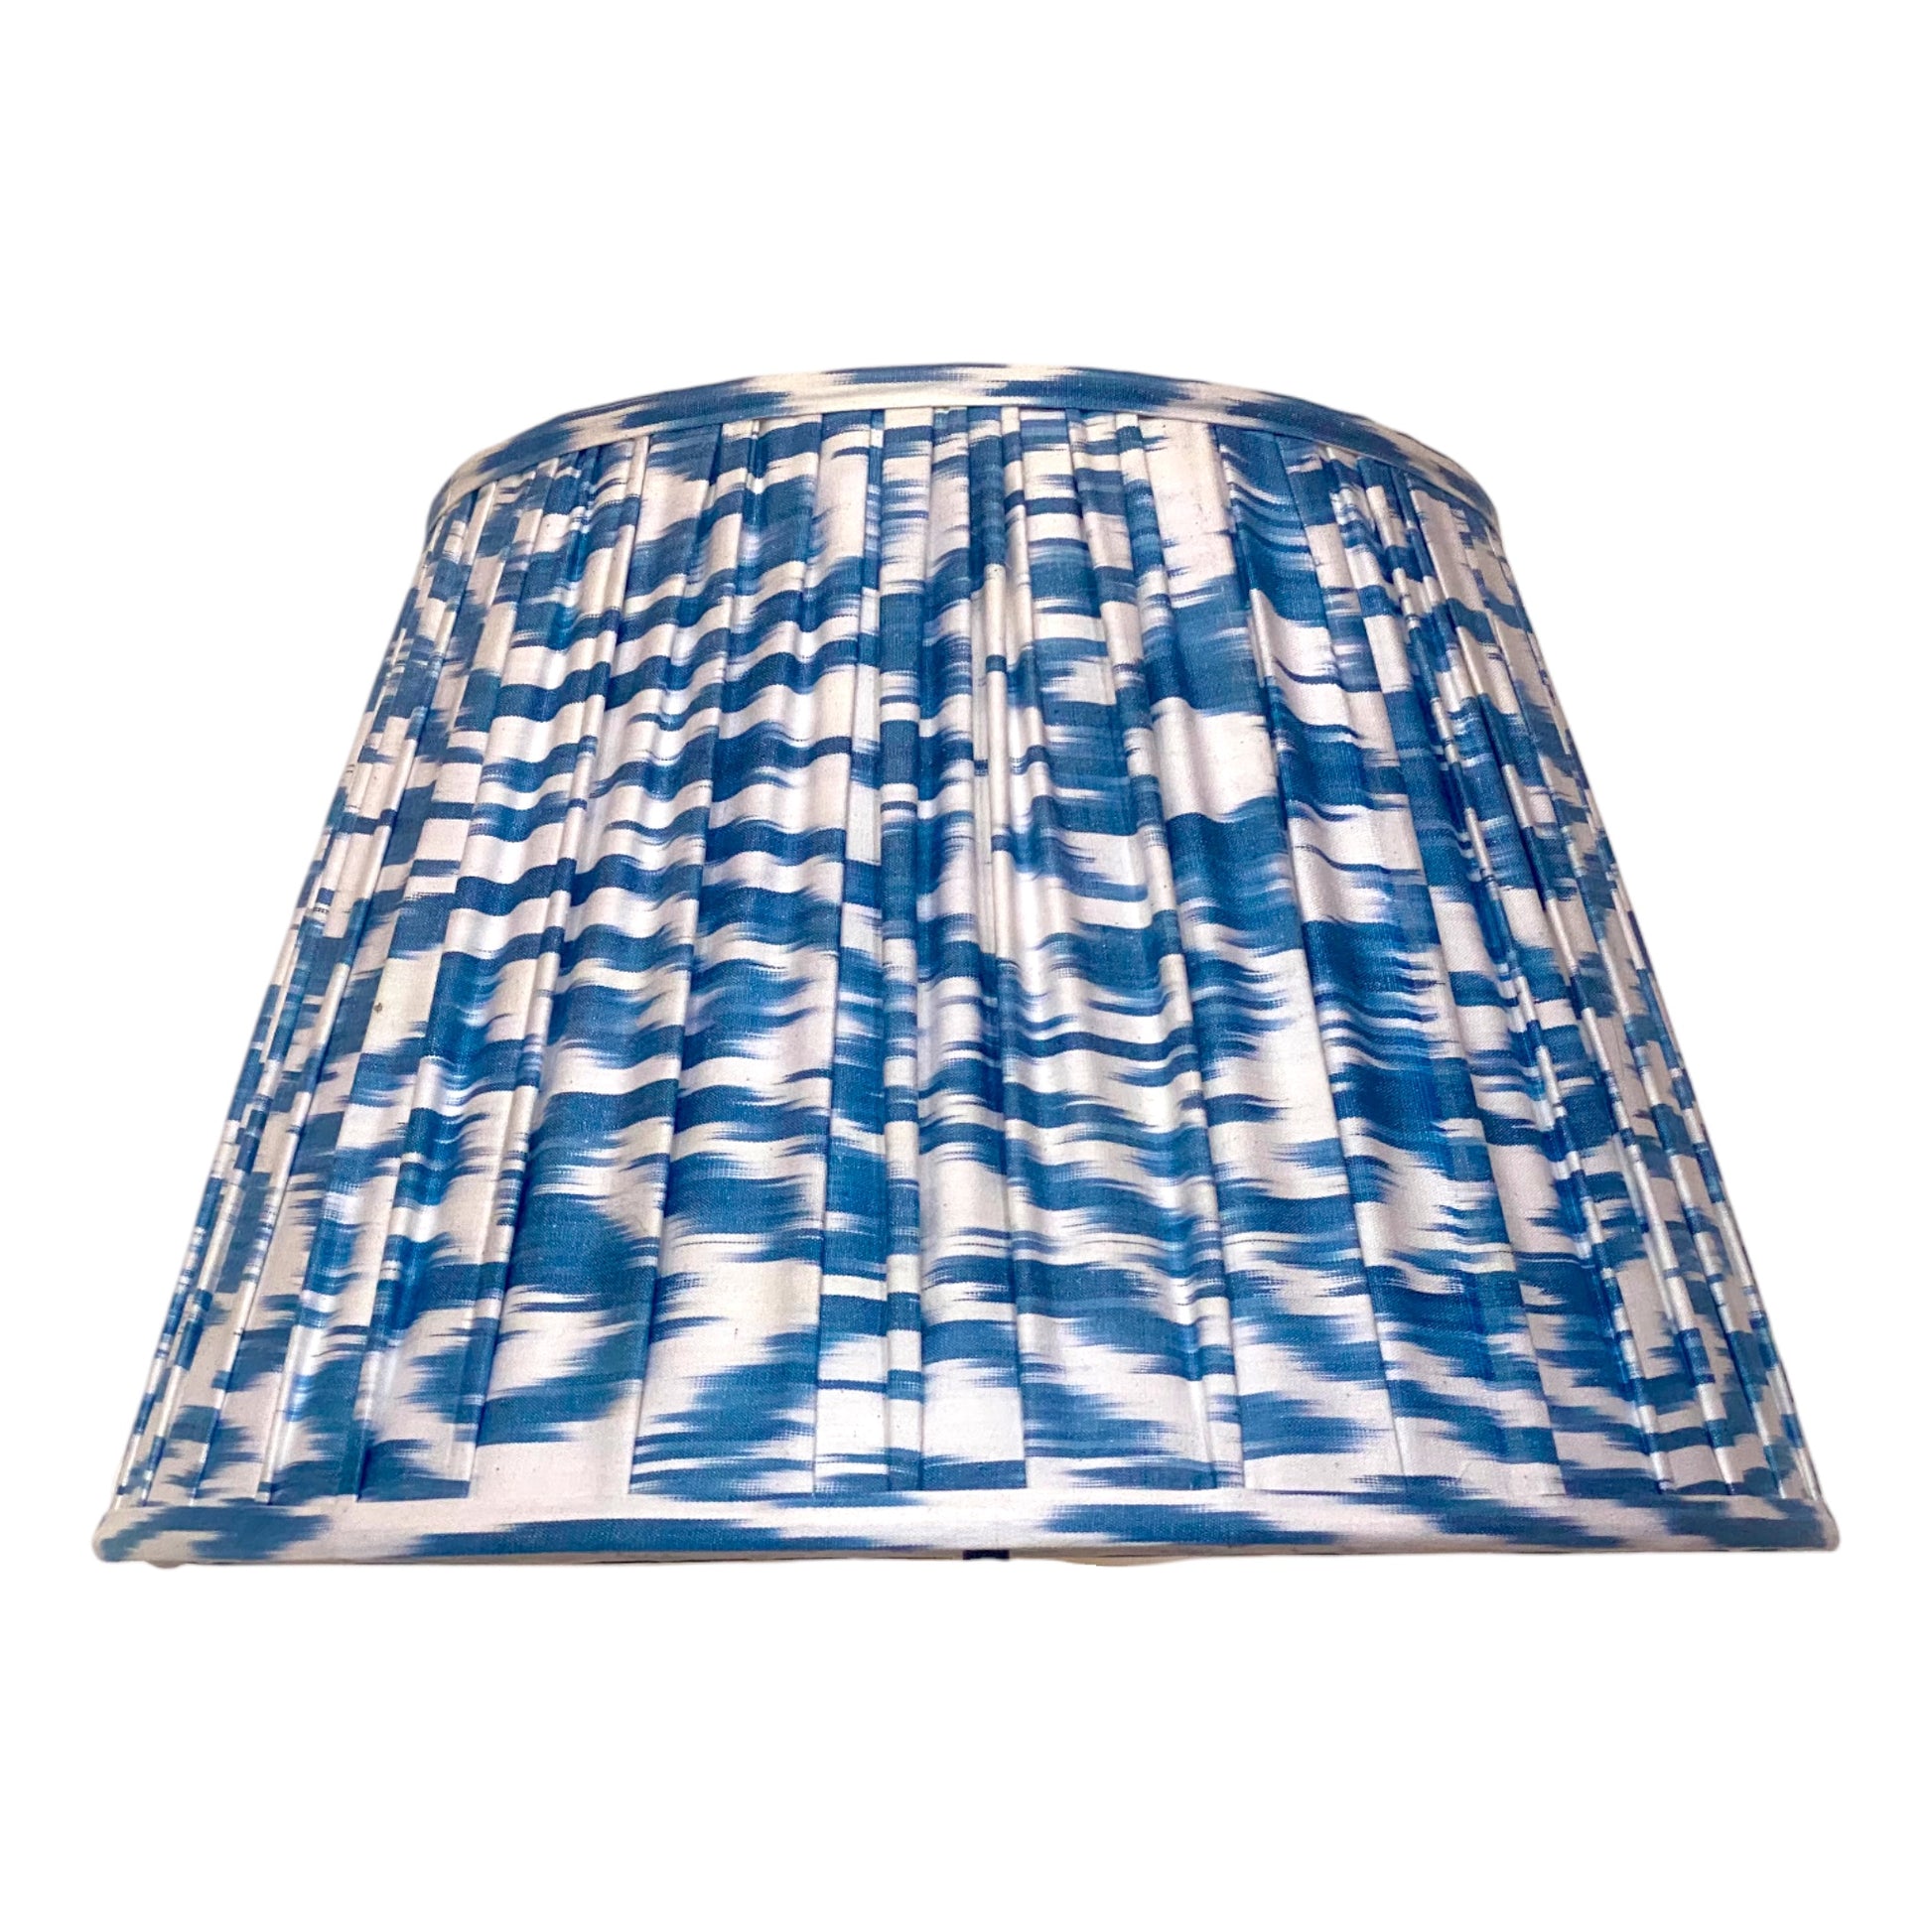 Blue and white ikat silk lampshade